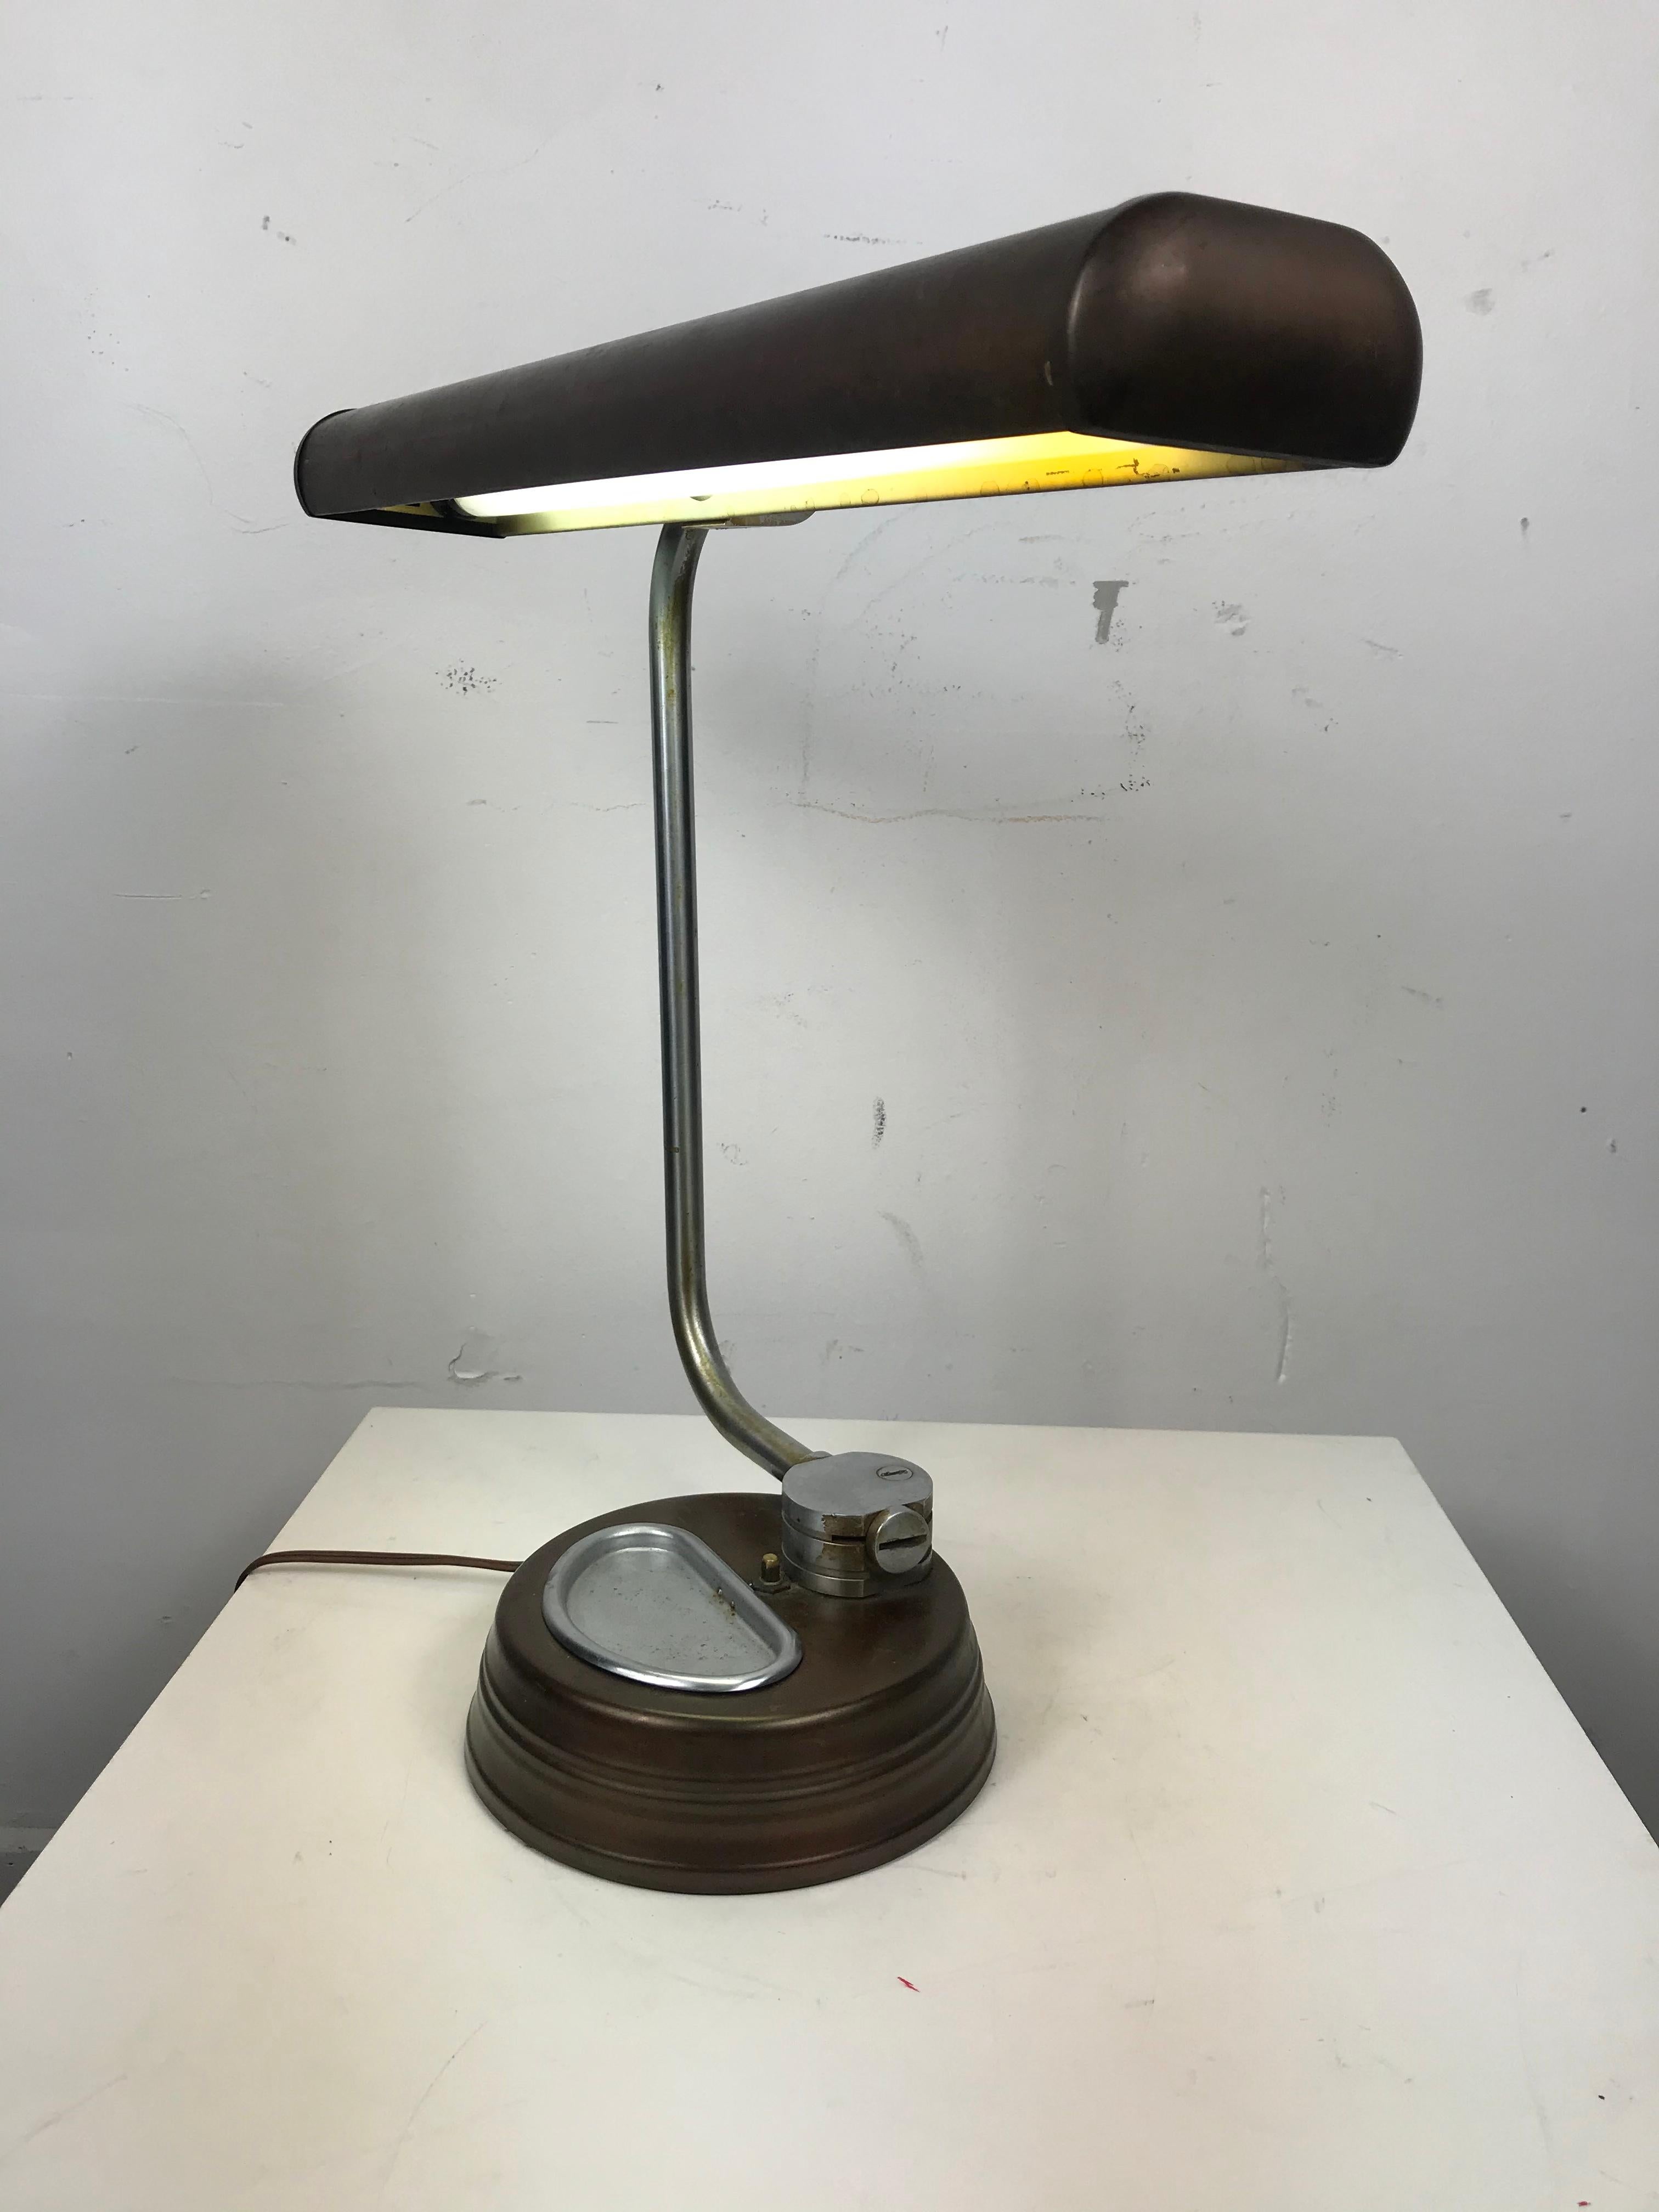 Modernist, Machine Age Stainless Steel / Metal Industrial Desk Lamp, Art Deco For Sale 6